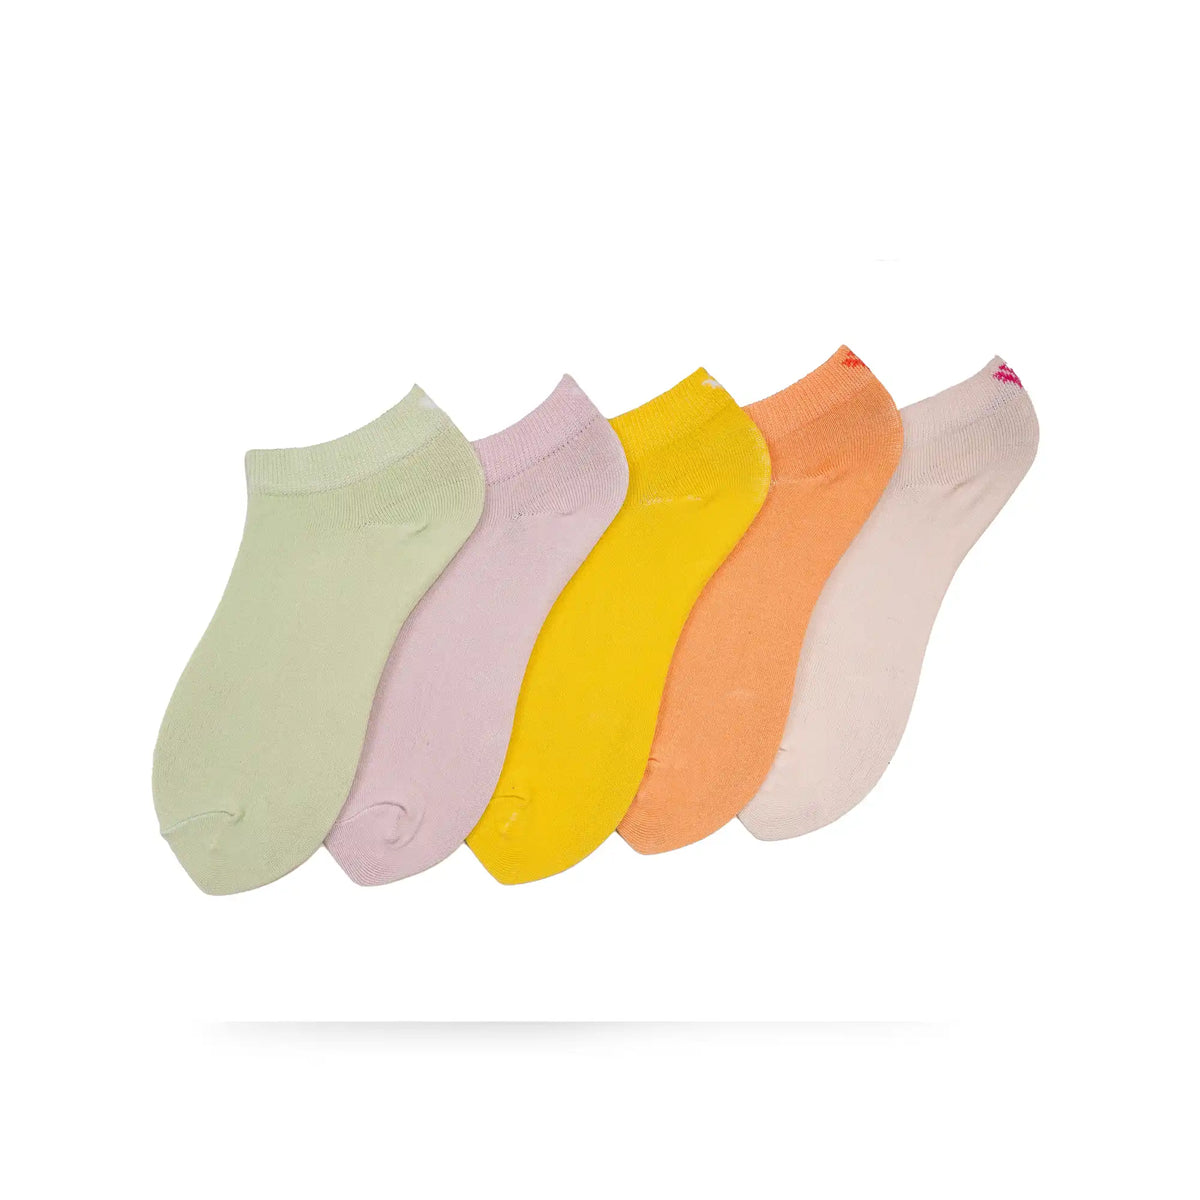 Young Wings Women's LT.Multi Colour Cotton Fabric Design Low Ankle Length Socks - Pack of 5, Style no. 6101-W